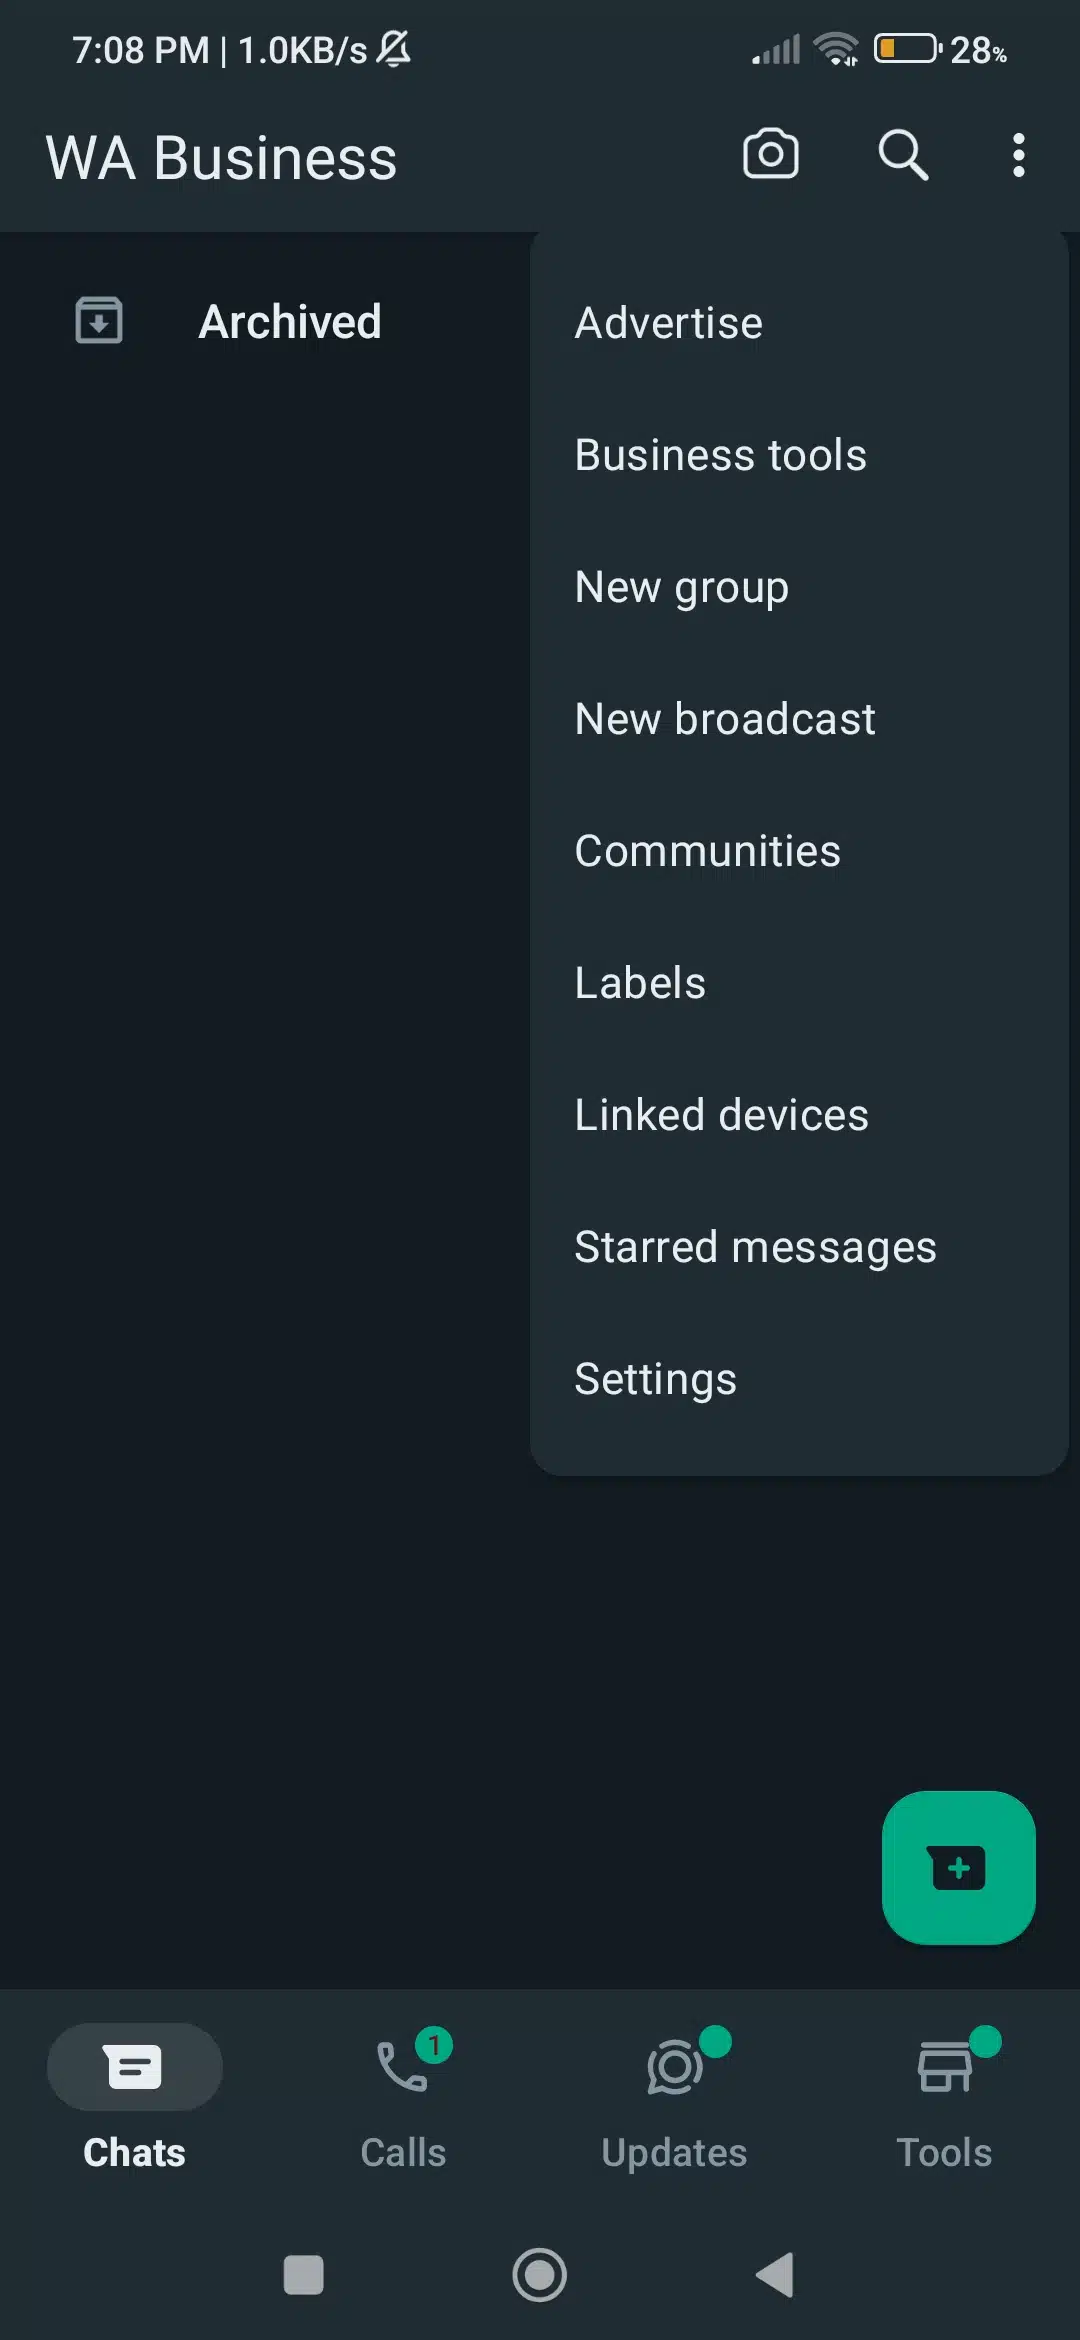  Click on the three-dot menu for Settings